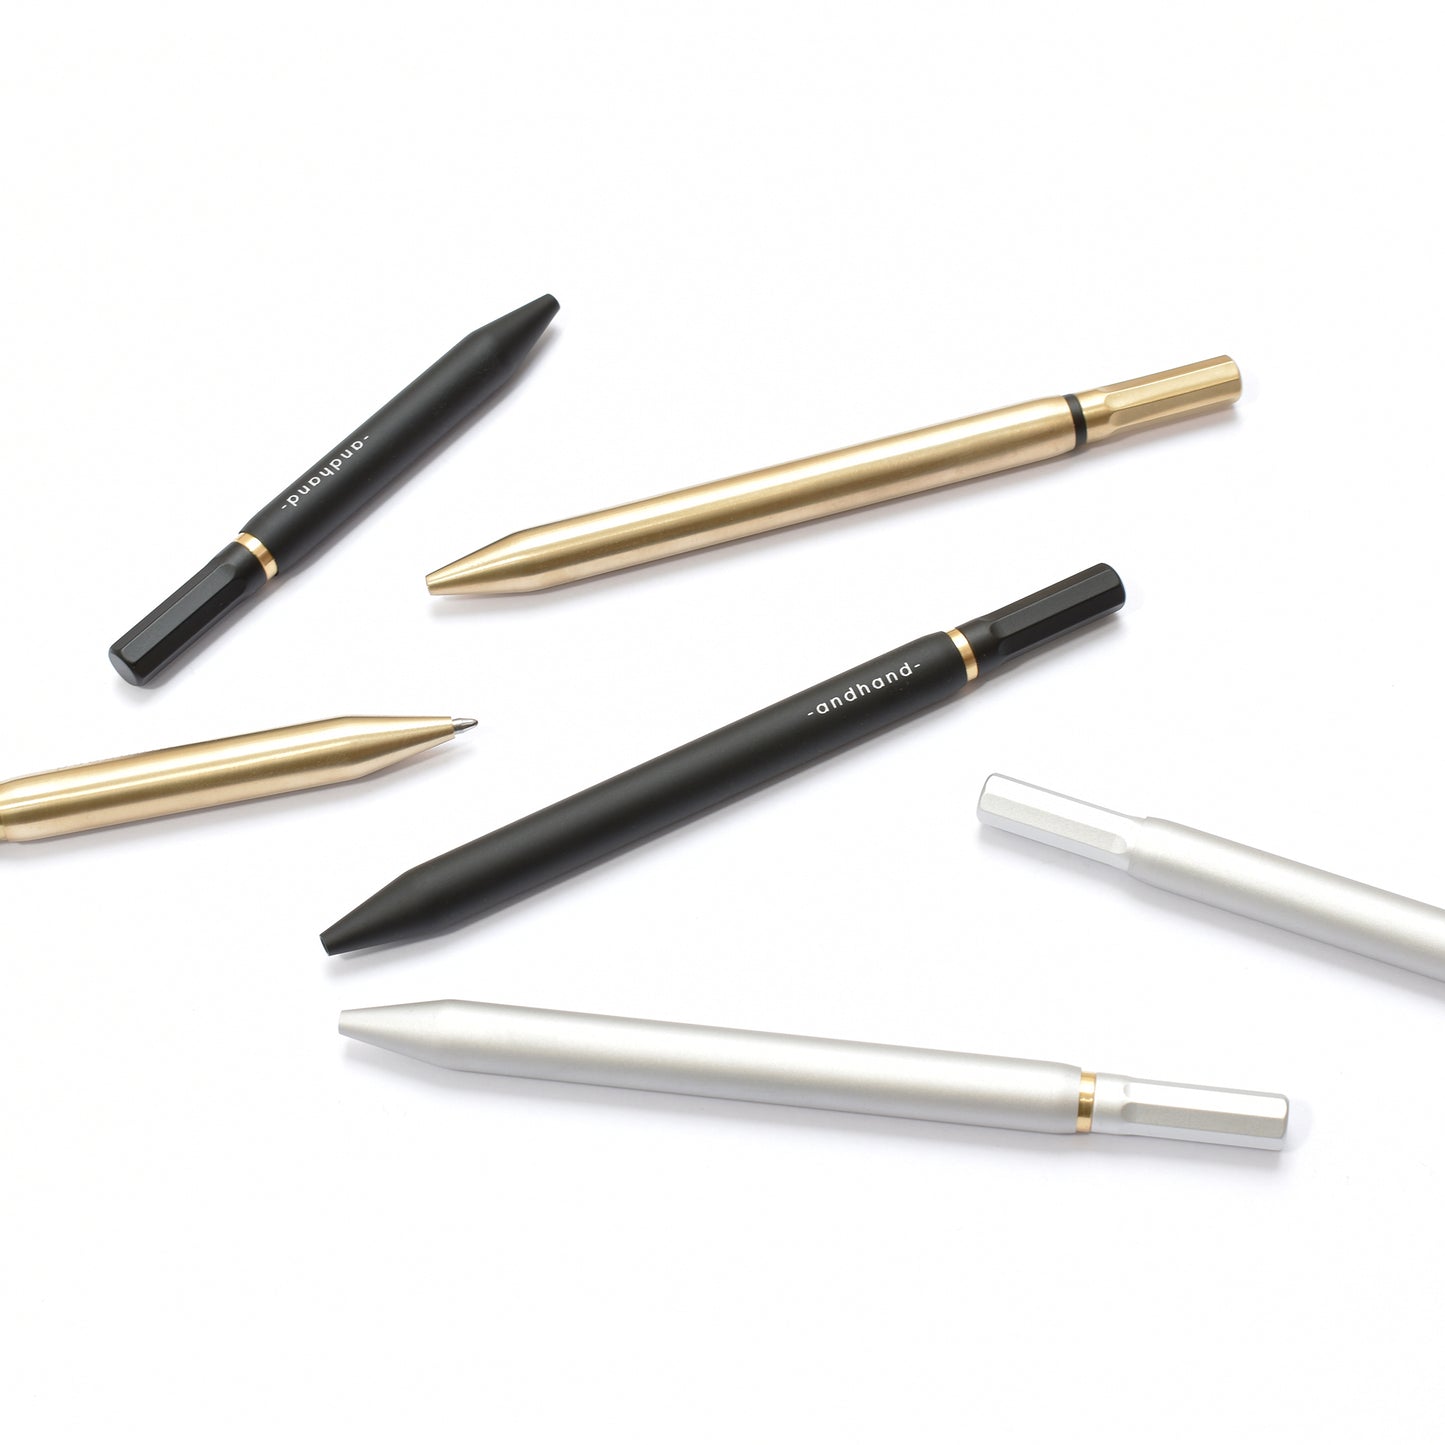 Method Pen Mini, solid brass mini pen by Andhand